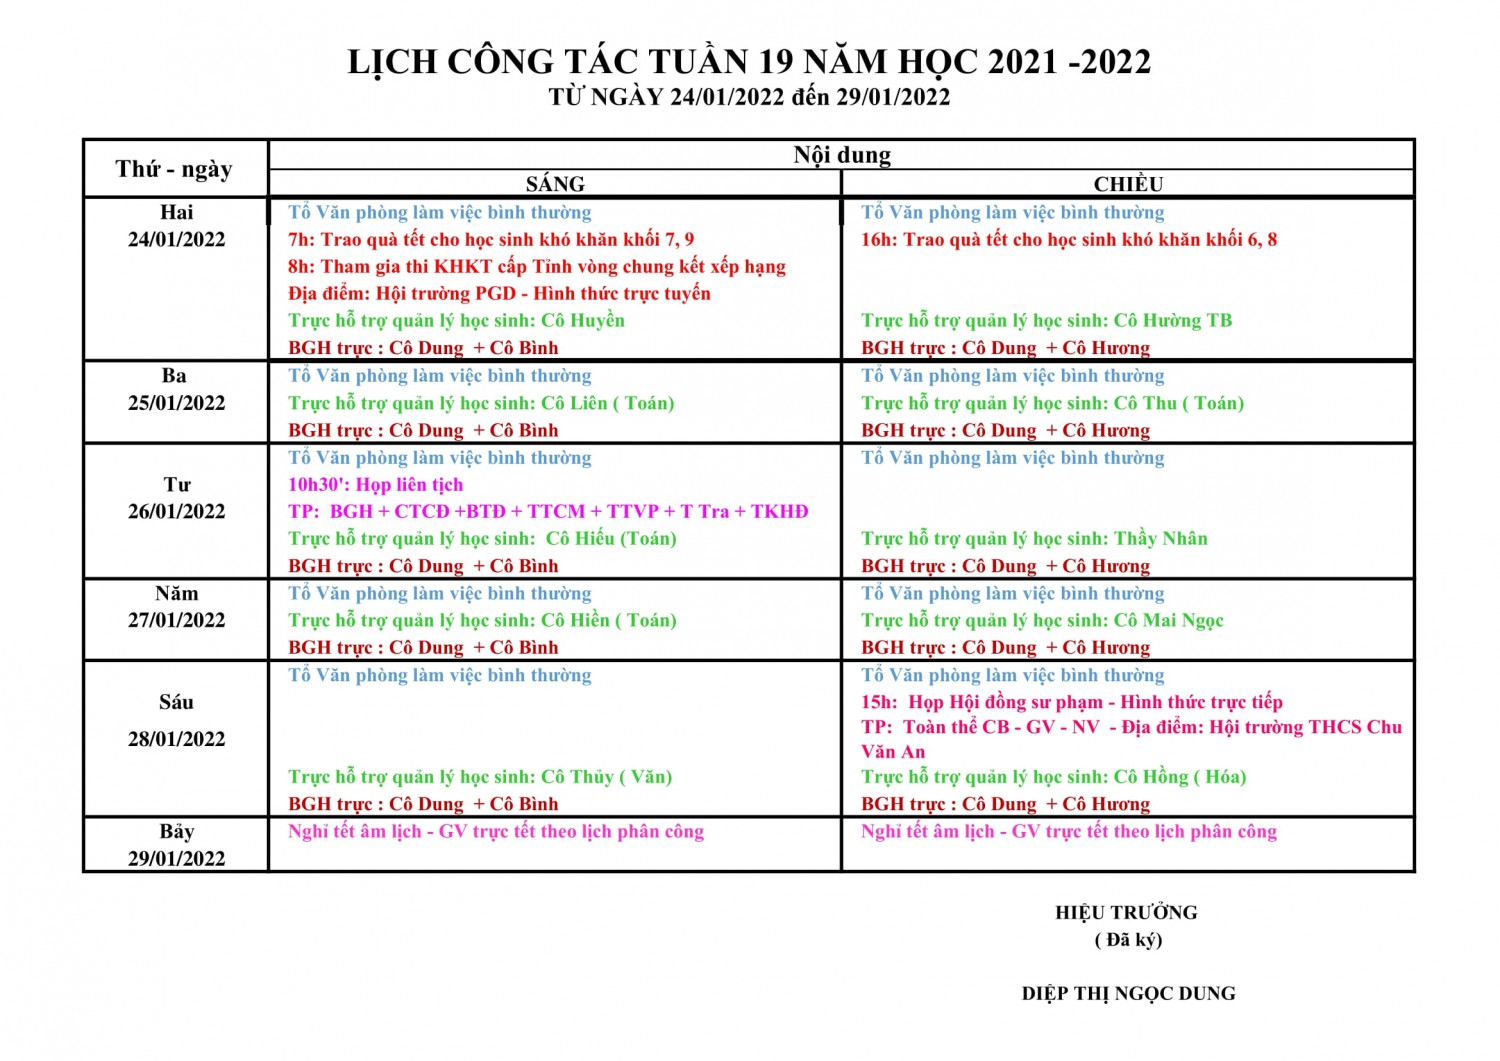 LCT T19 2122 1